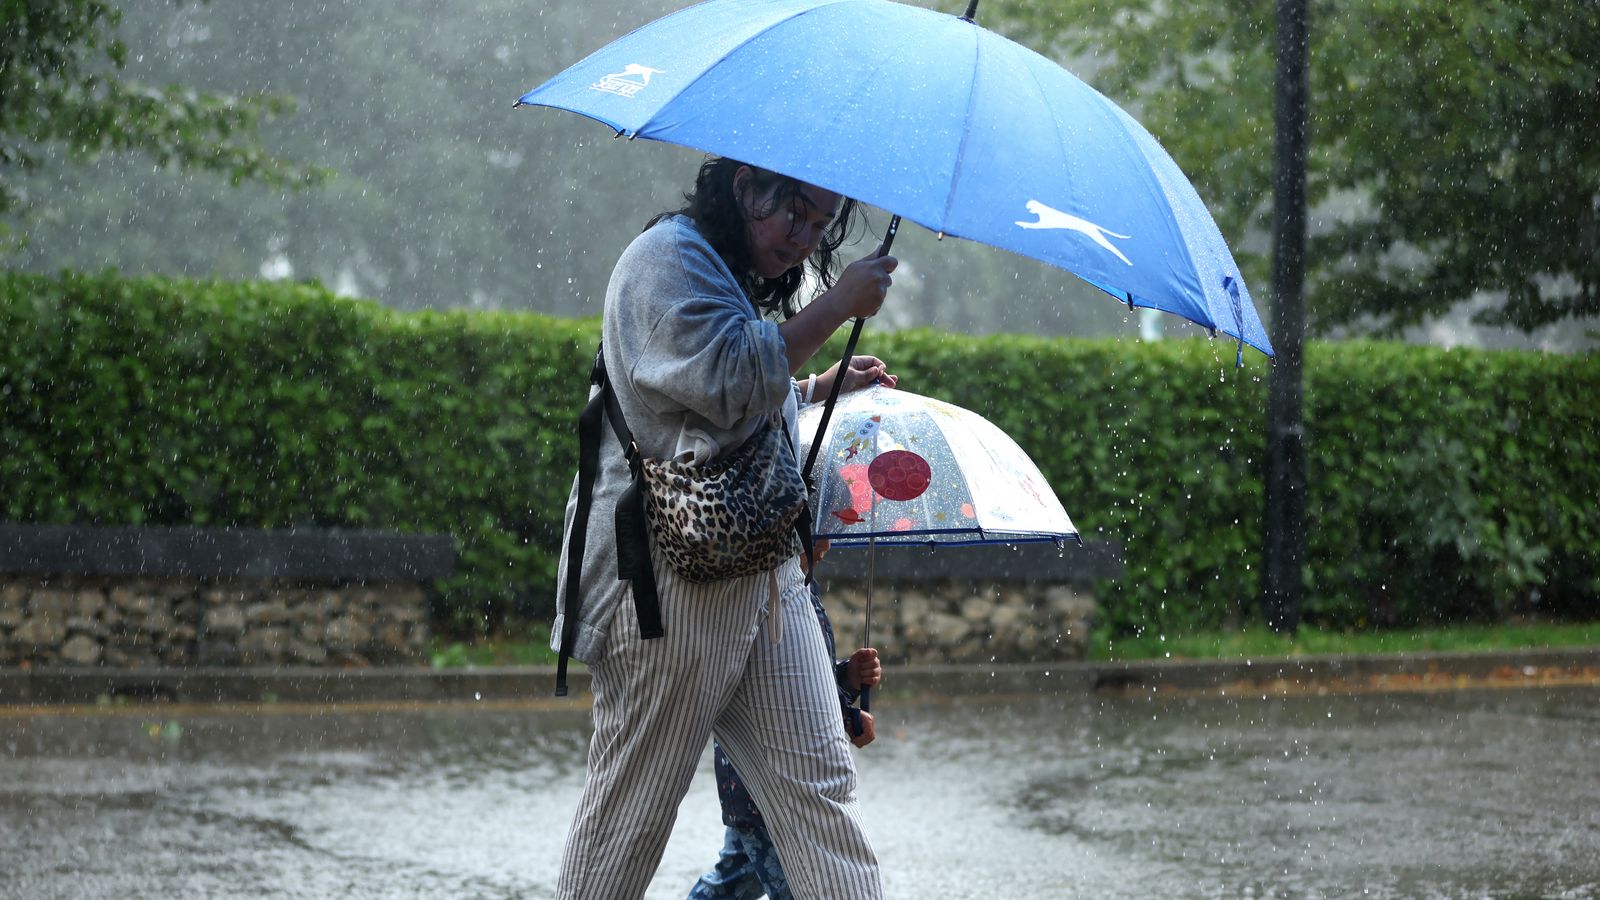 UK weather: Heavy rain to drench UK before temperatures soar to 30C